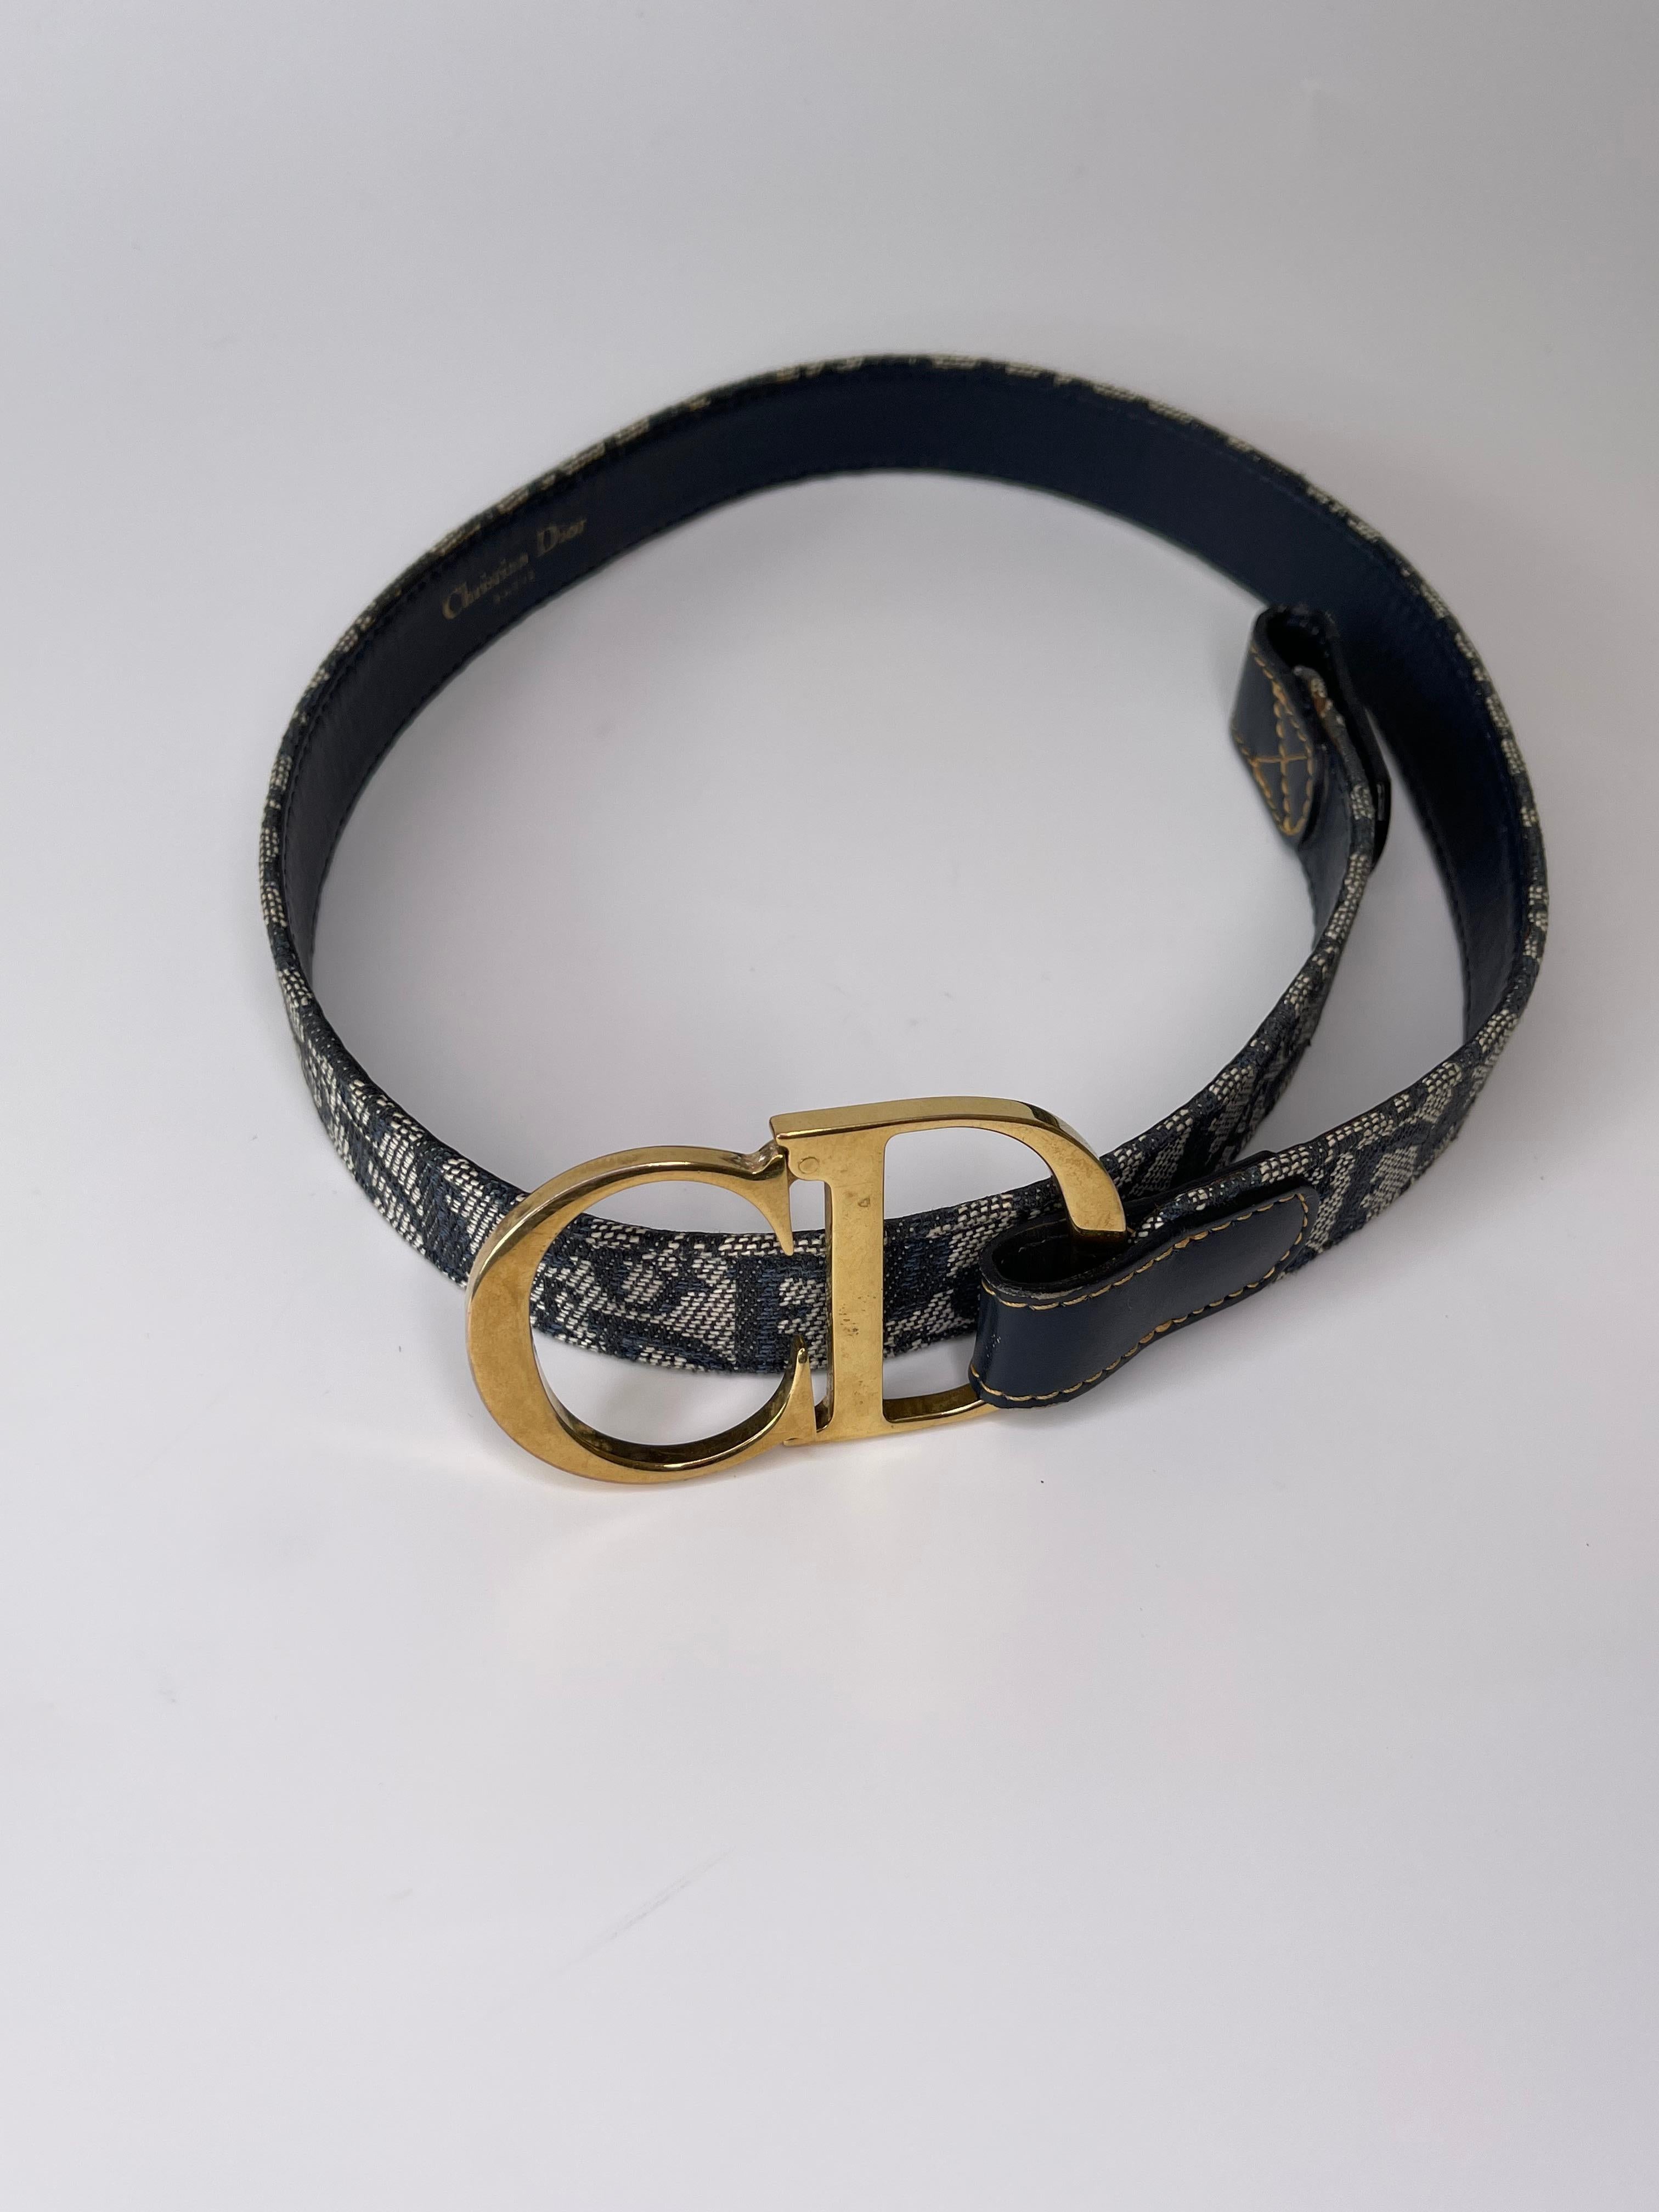 This Dior trotter pattern belt is made of leather and canvas and also consists of a large gold tone buckle, looks great in contrast to gold stitching at leather near the buckle itself. Dior logo located throughout the belt. 

COLOR: Navy
MATERIAL: